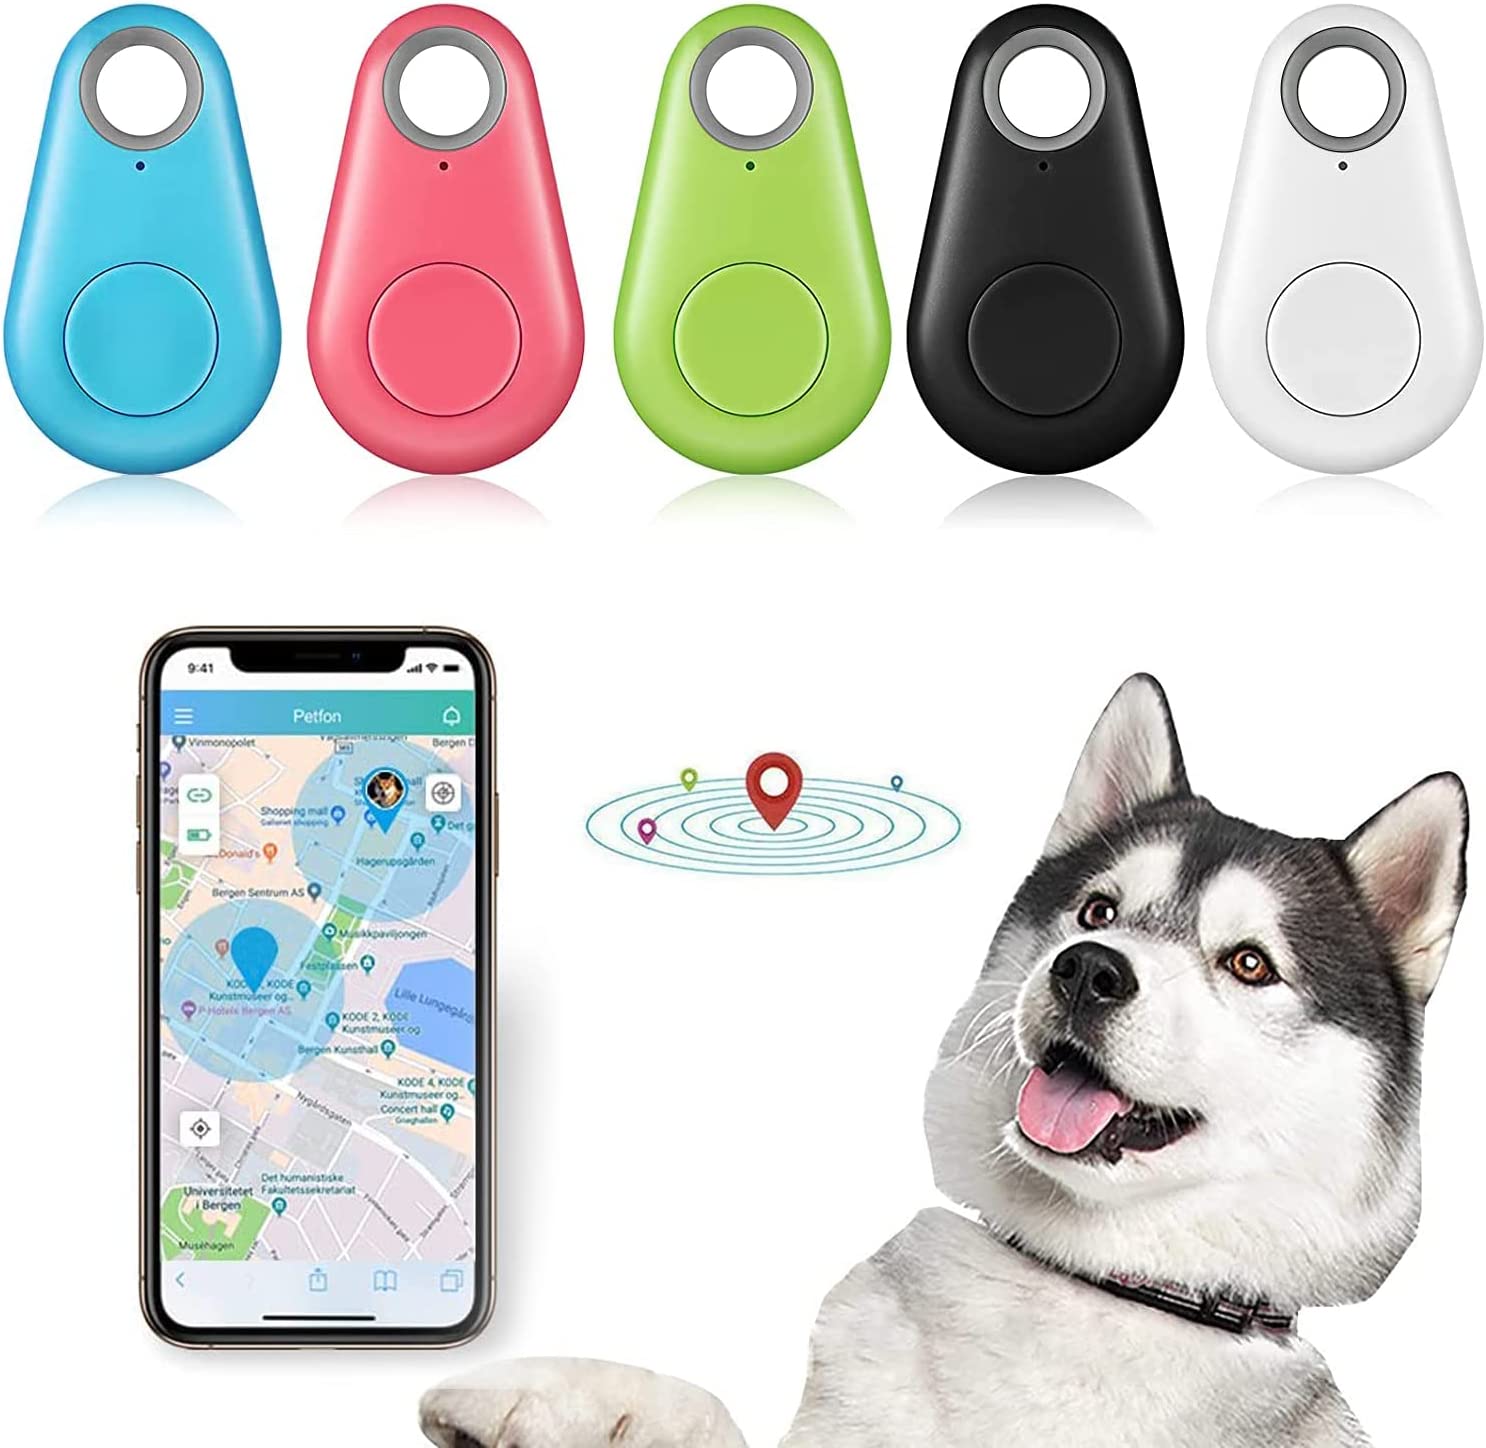 Dog GPS Tracking Device Waterproof GPS Location Smart Activity Tracker Unlimited Range GPS Pet Tracker for Cats